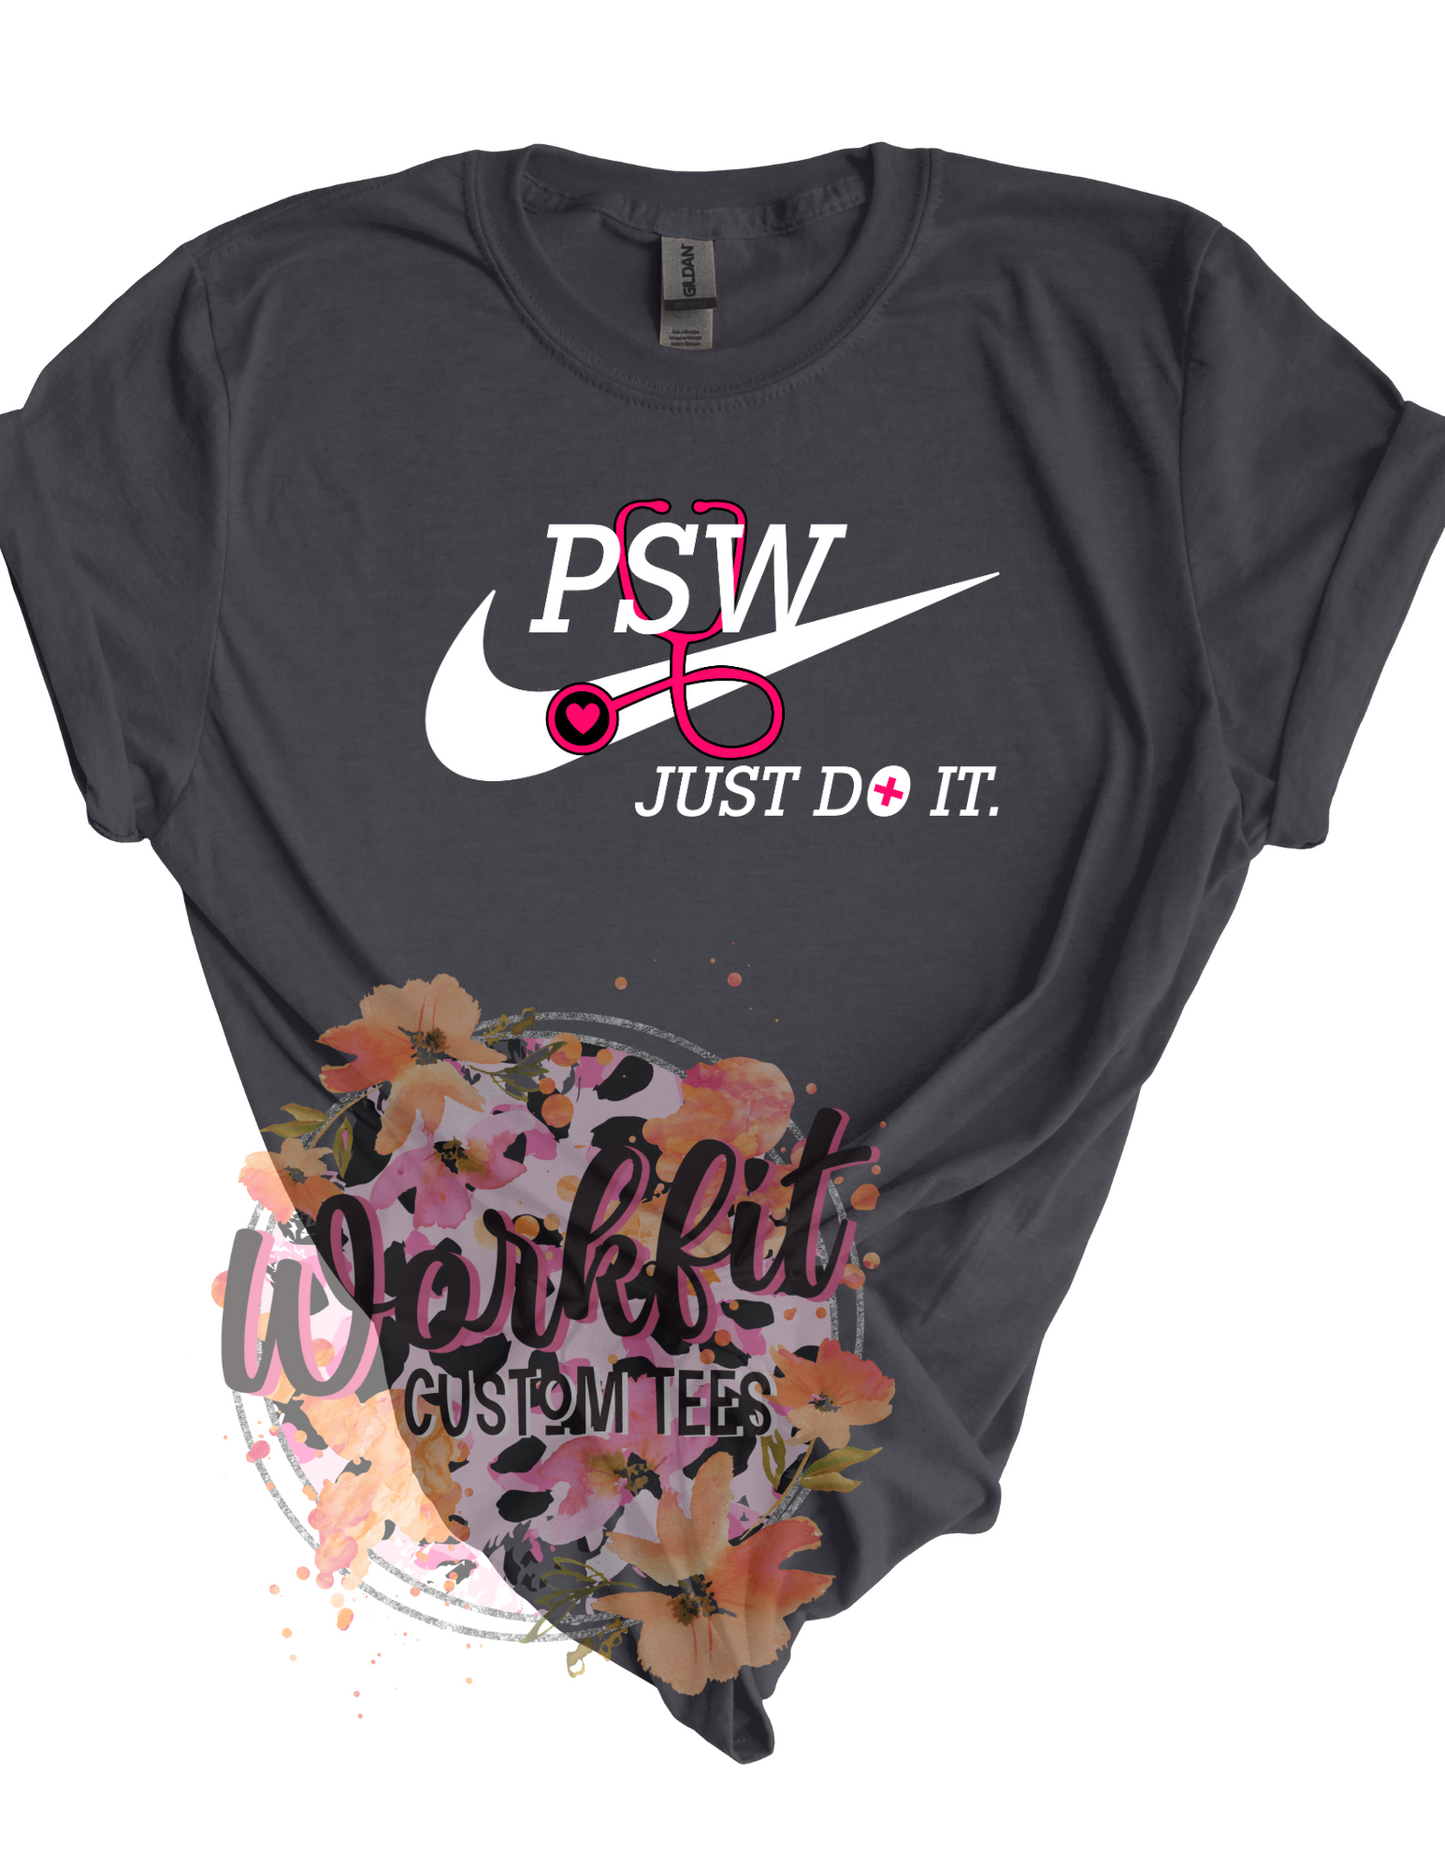 PSW- Just Do it T-Shirt